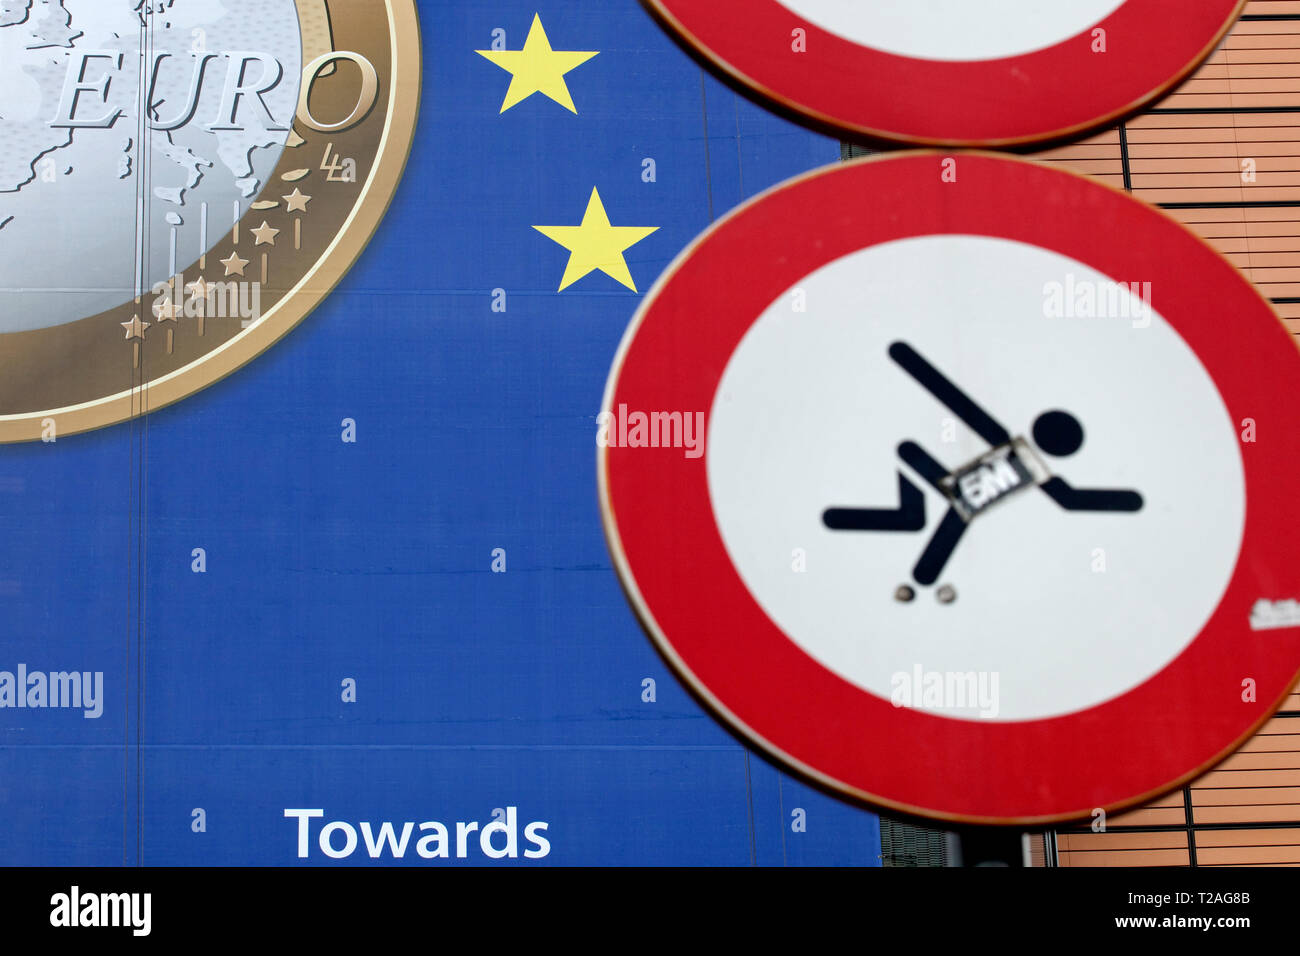 BRUSSELS - Traffic sign at the Berlaymont building, headquarters of the European Commision. Stock Photo